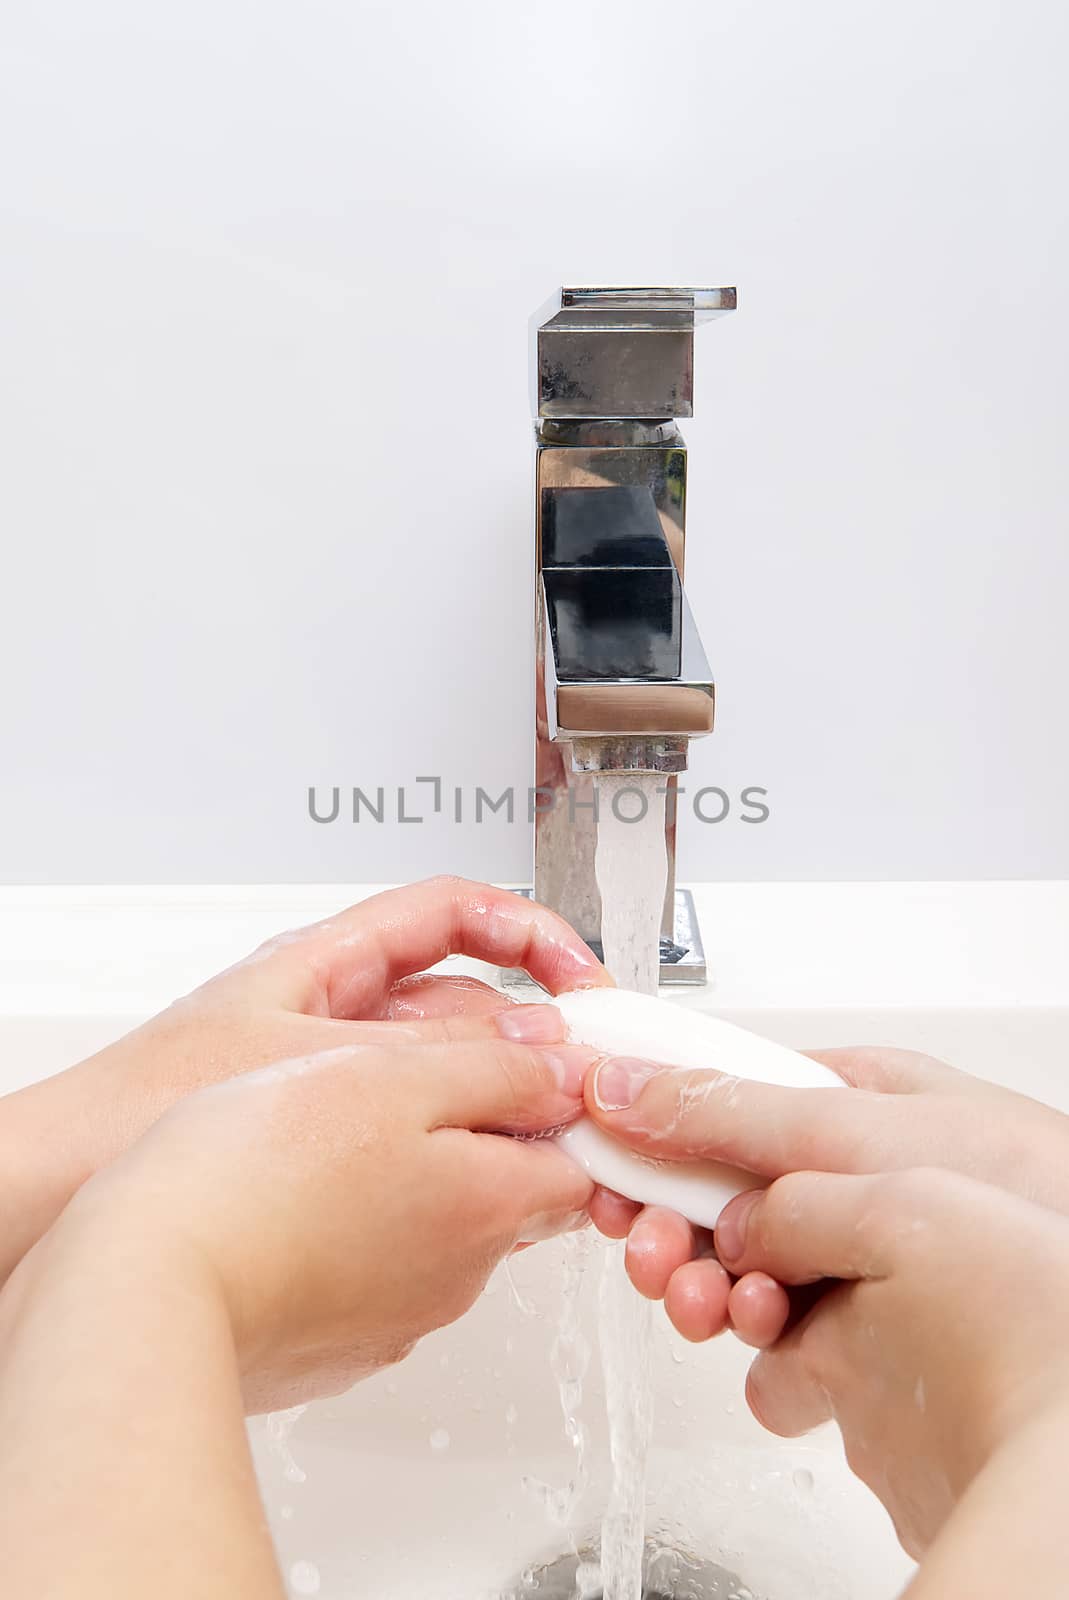 Childrens washing hands with soap under the crane with water. close-up. personal hygiene concept.